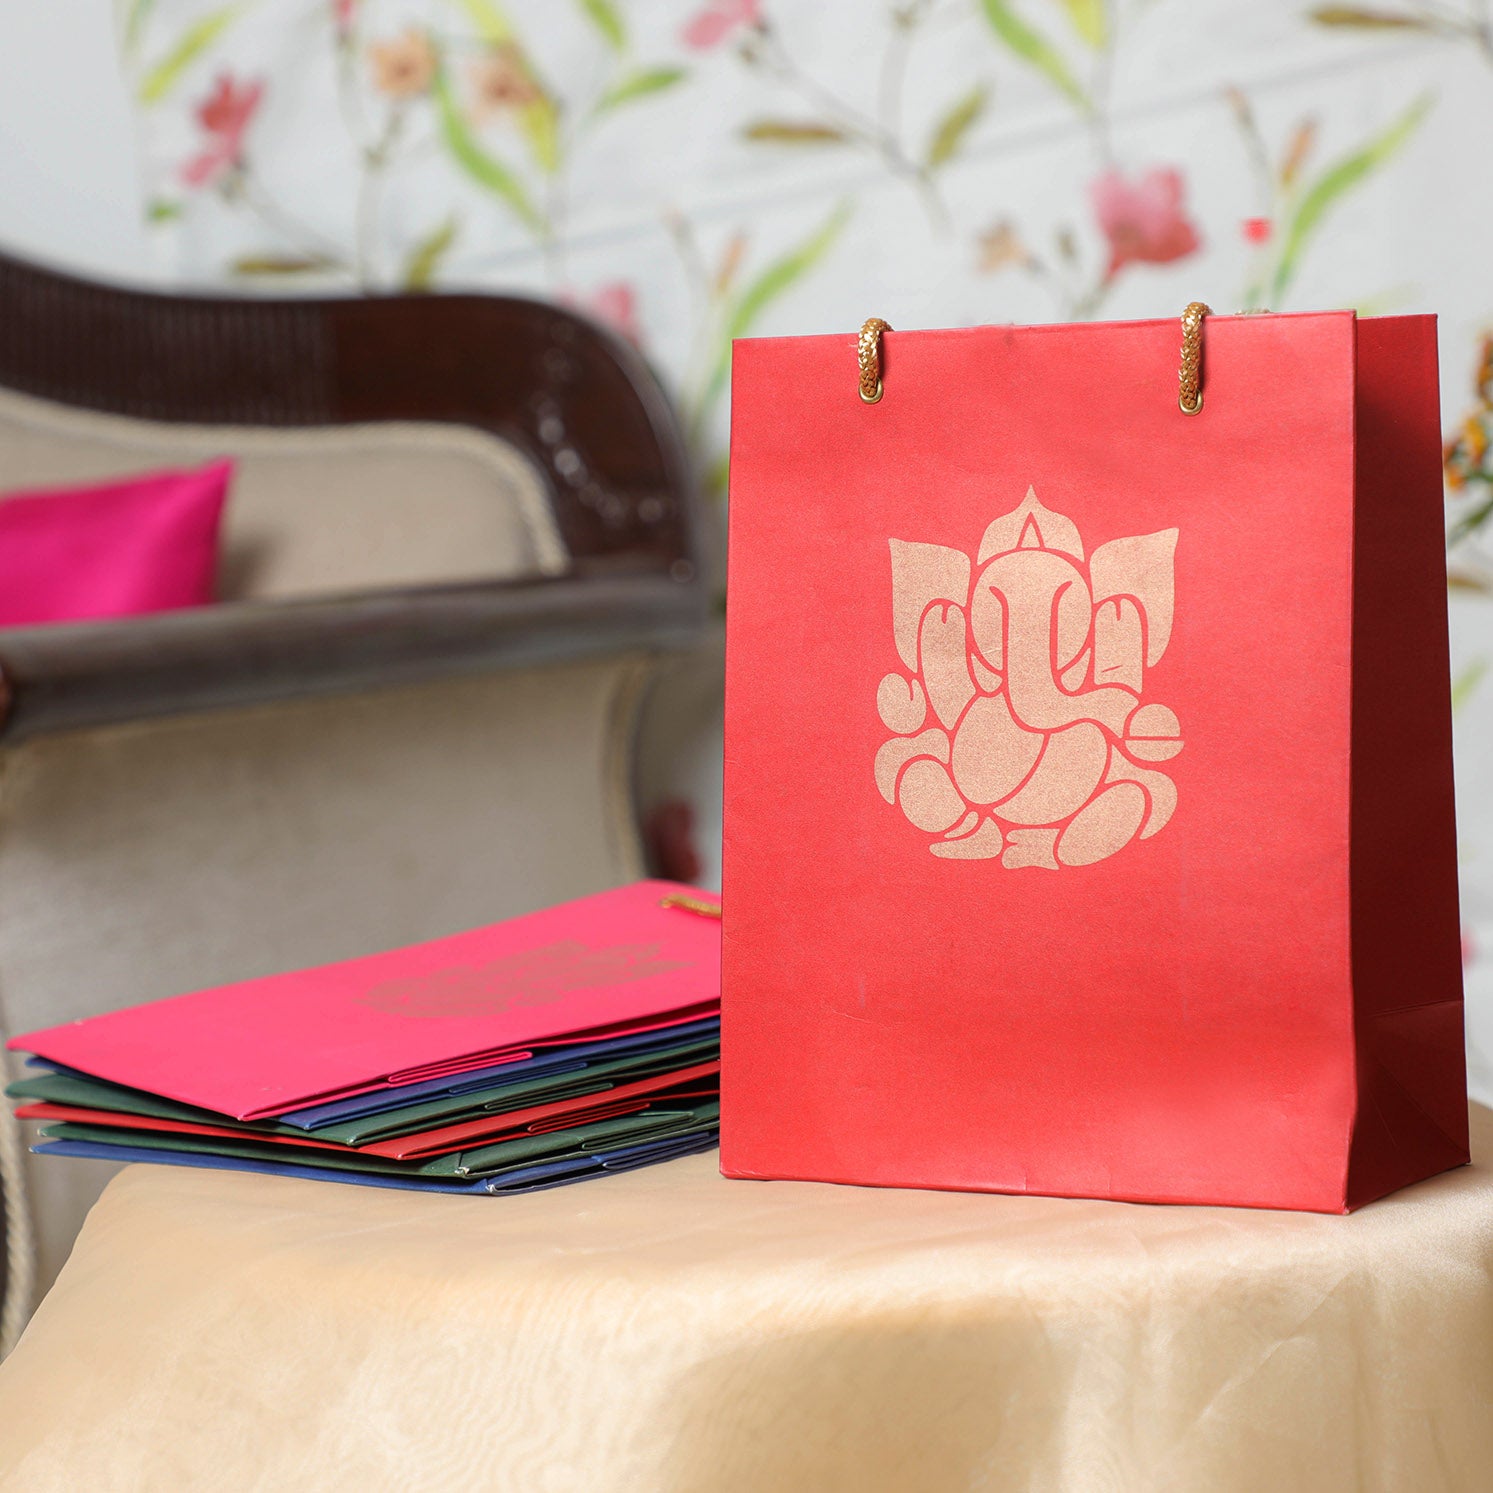 Gift wrapping paper bags for events